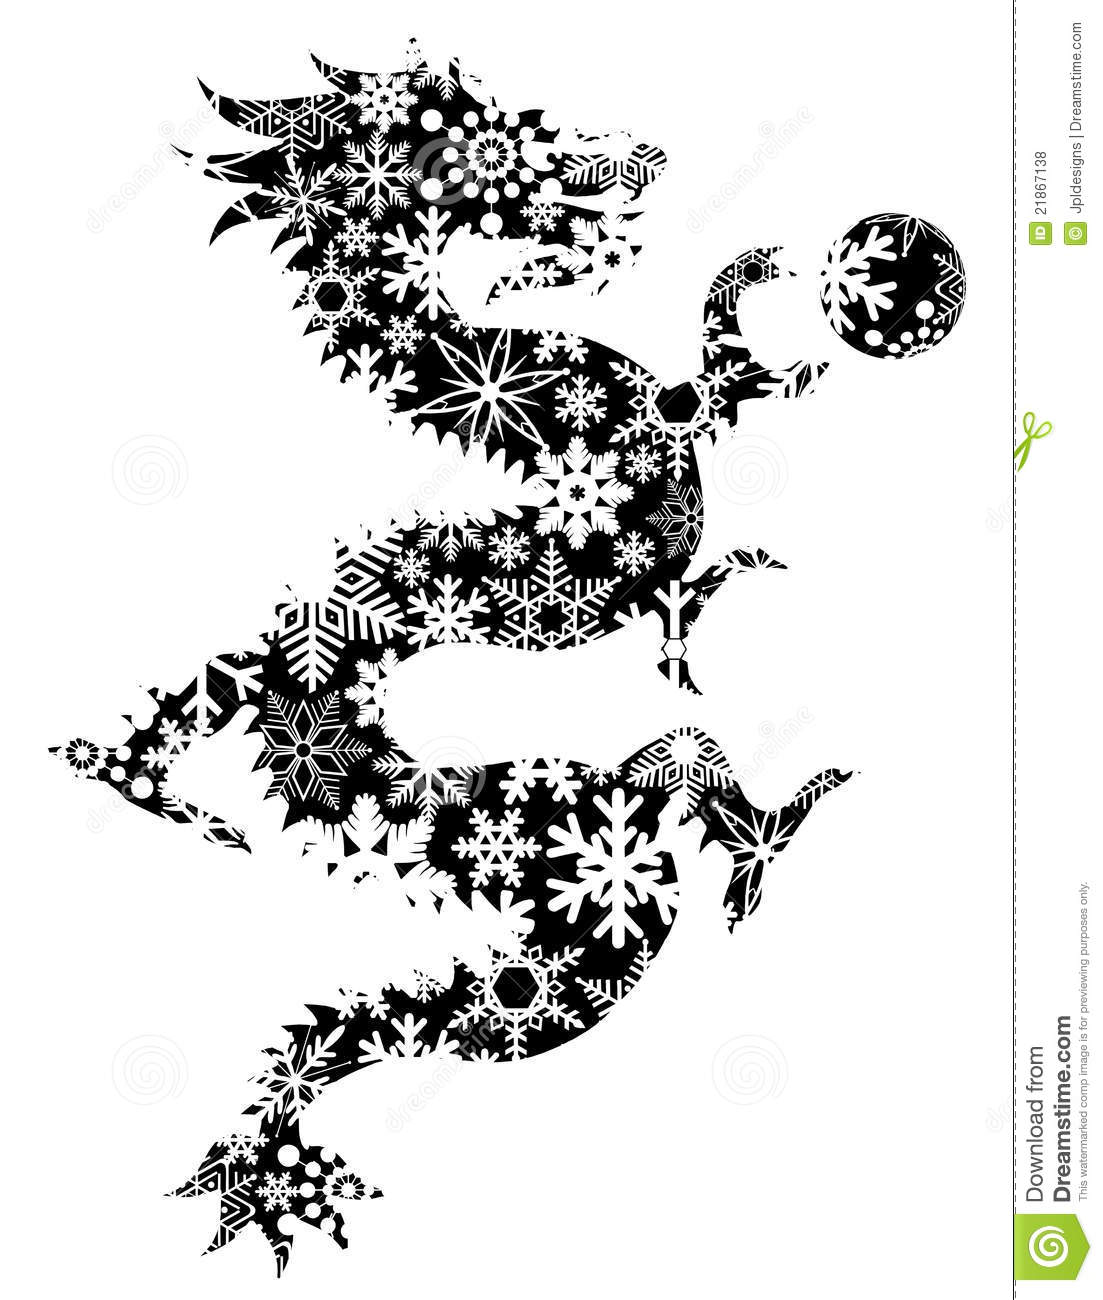 Chinese Dragon Snowflakes Black And White Clip Art Royalty Free Stock